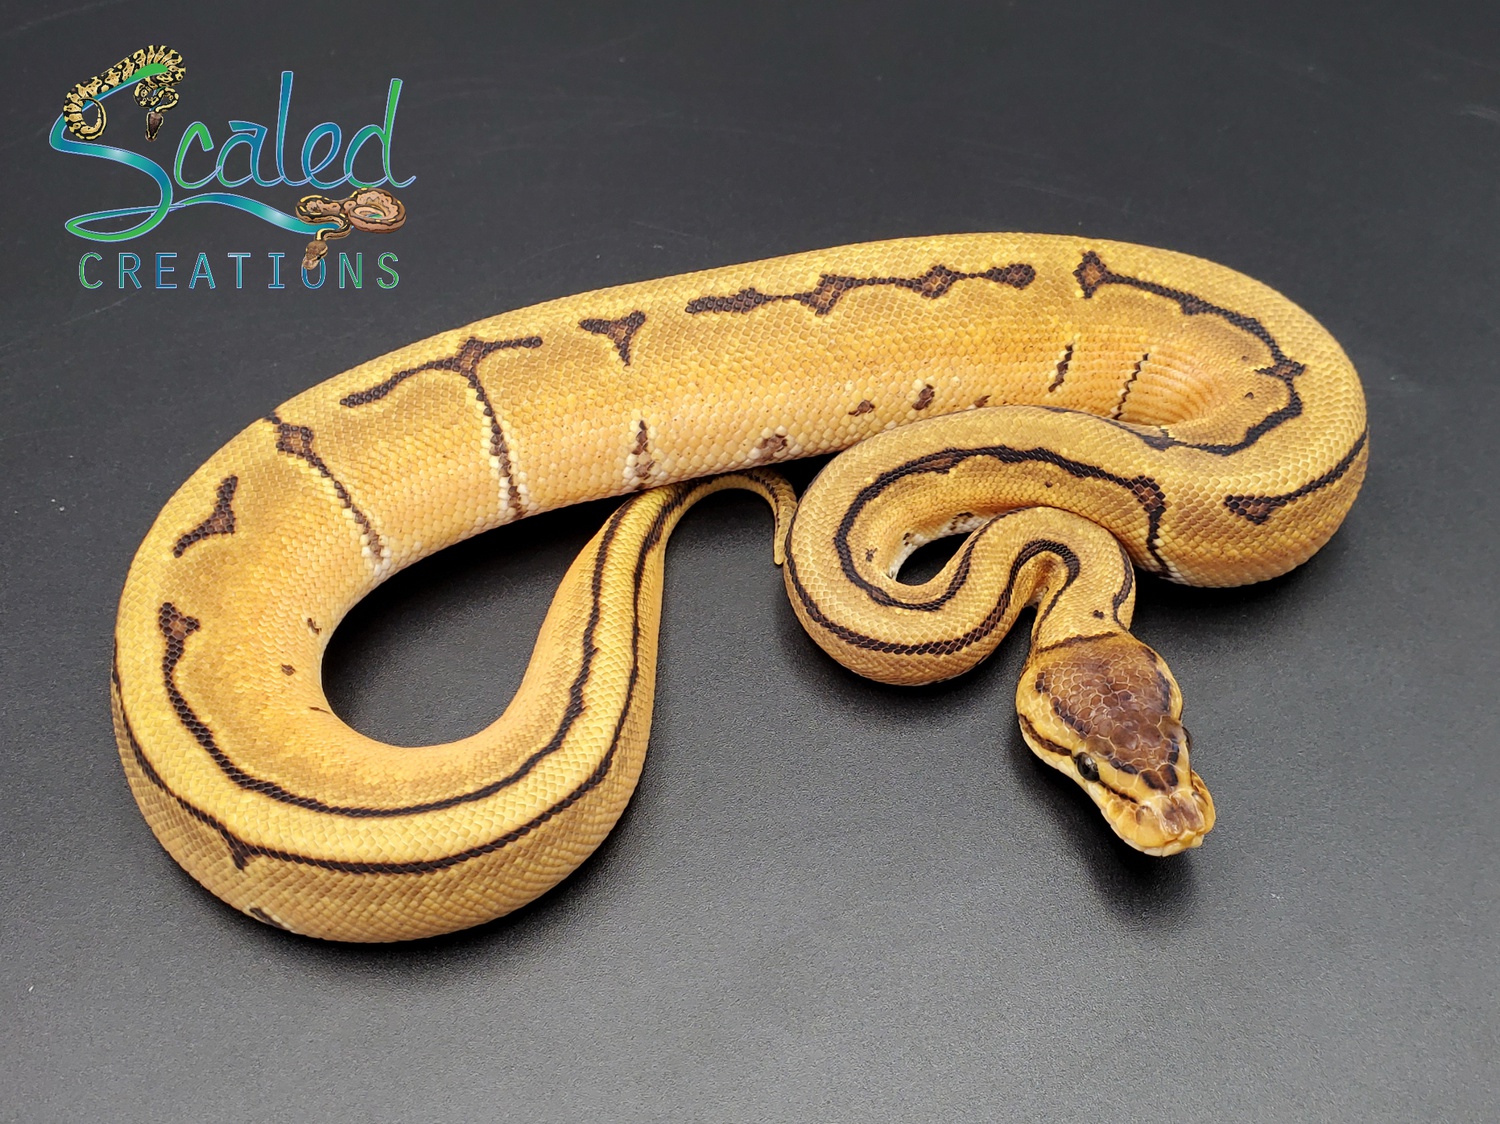 Fusion Orange Dream Pinstripe Ball Python by Scaled Creations